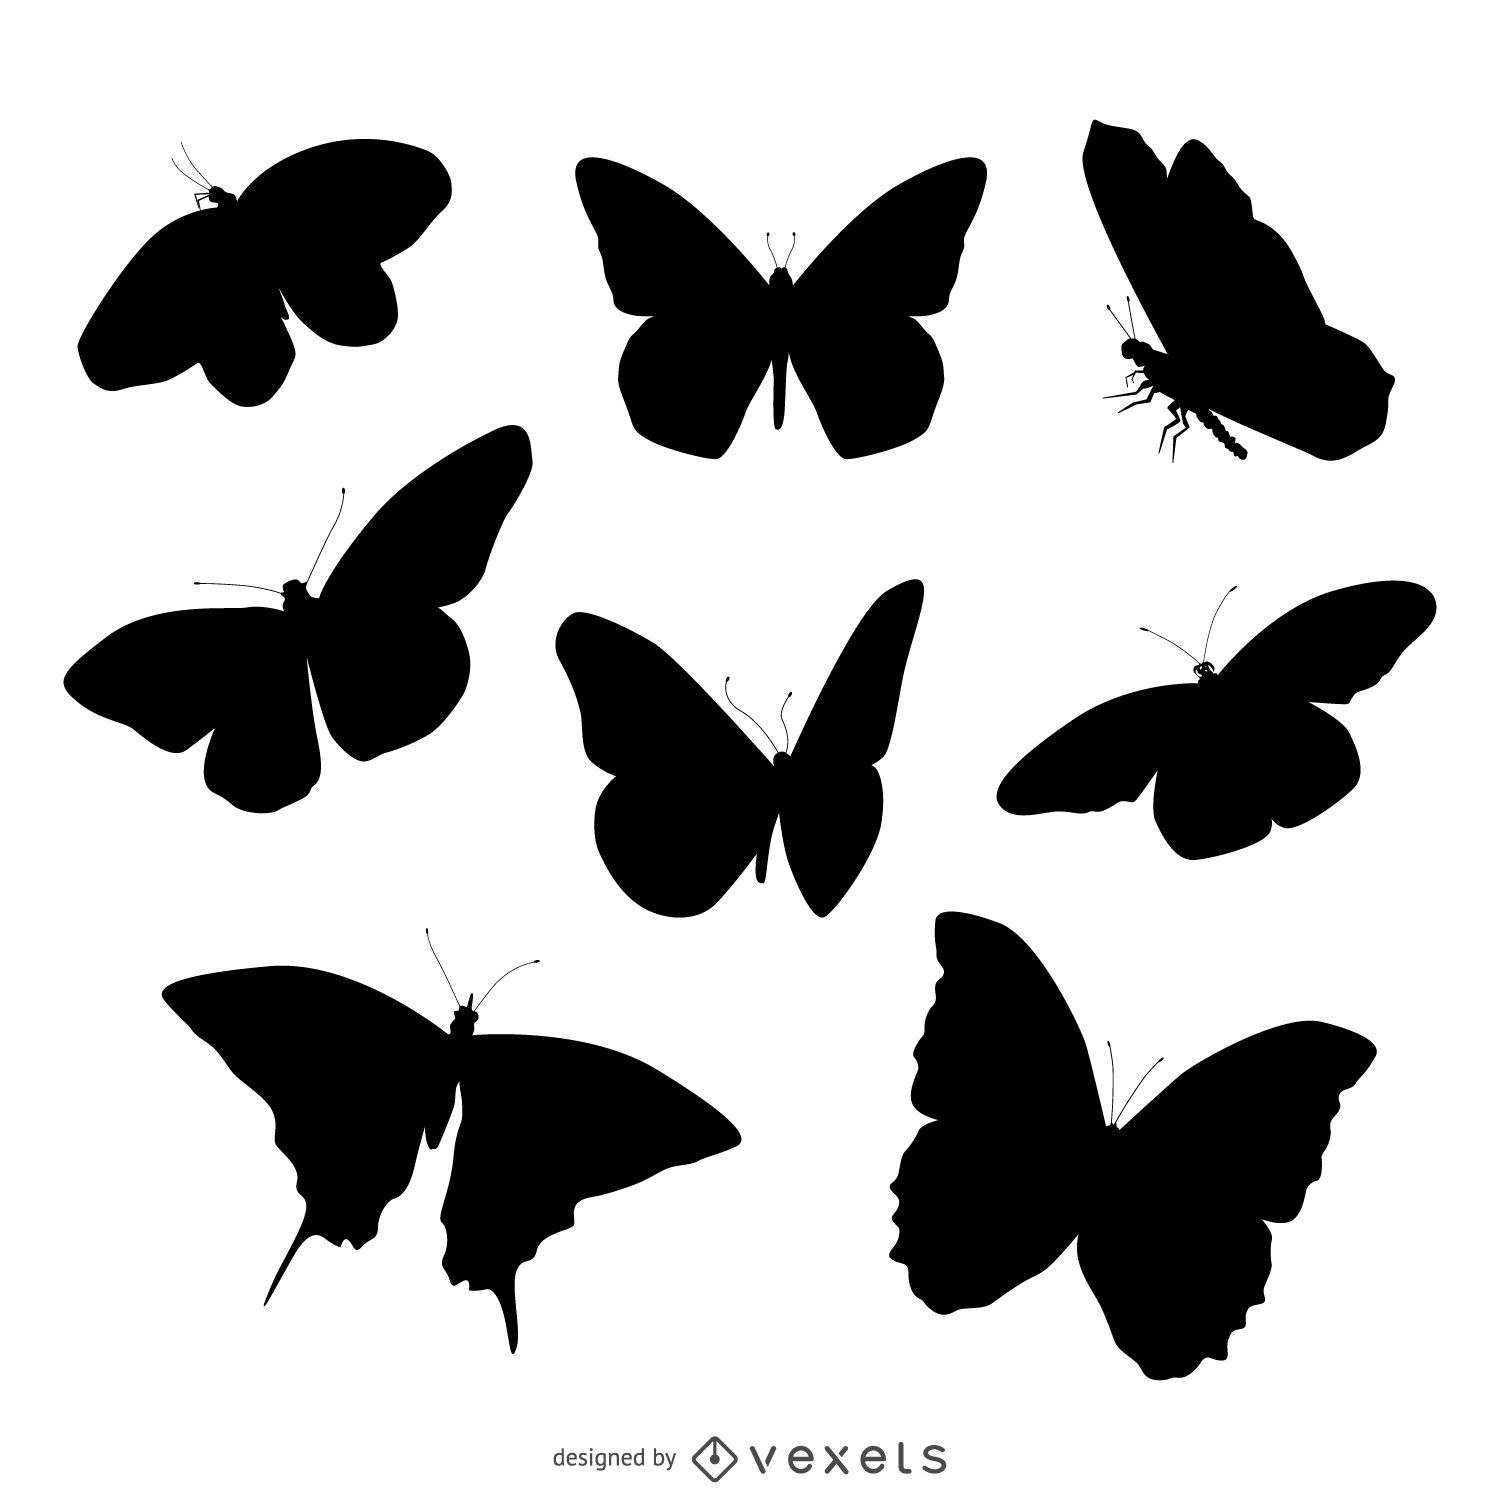 Butterfly silhouette illustration set